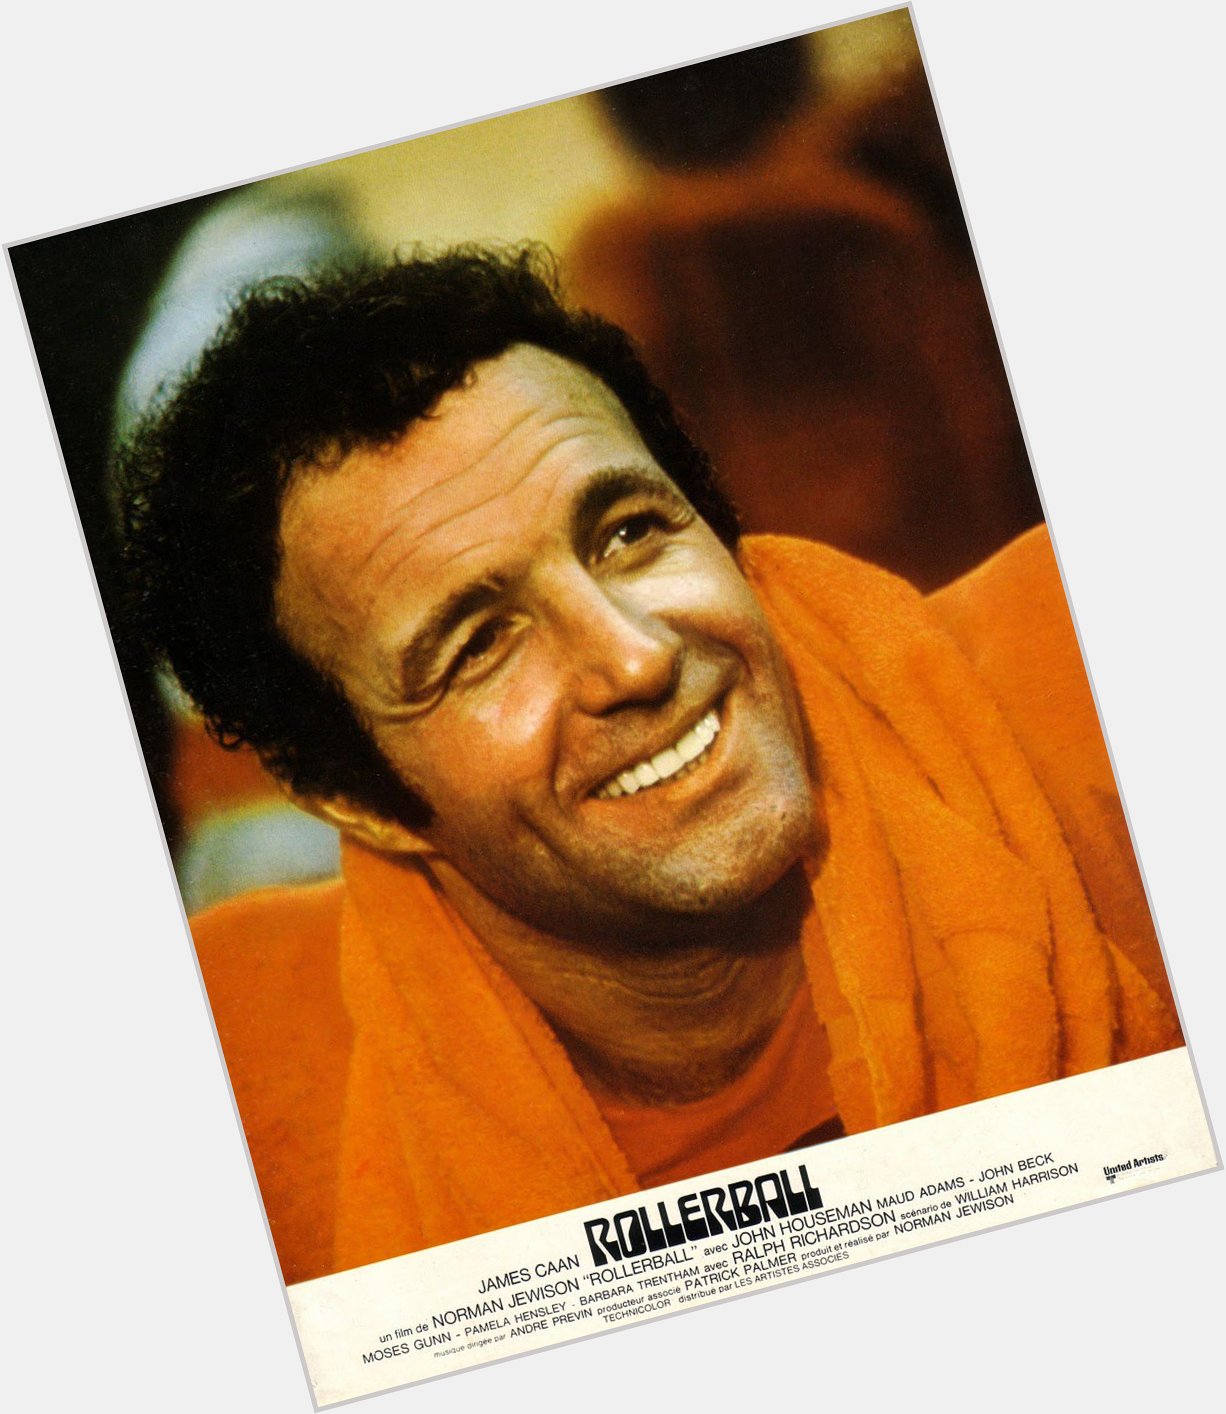 Such a superb actor, happy birthday Mr. Caan, here James Caan as Jonathan E. - Rollerball (1975) 